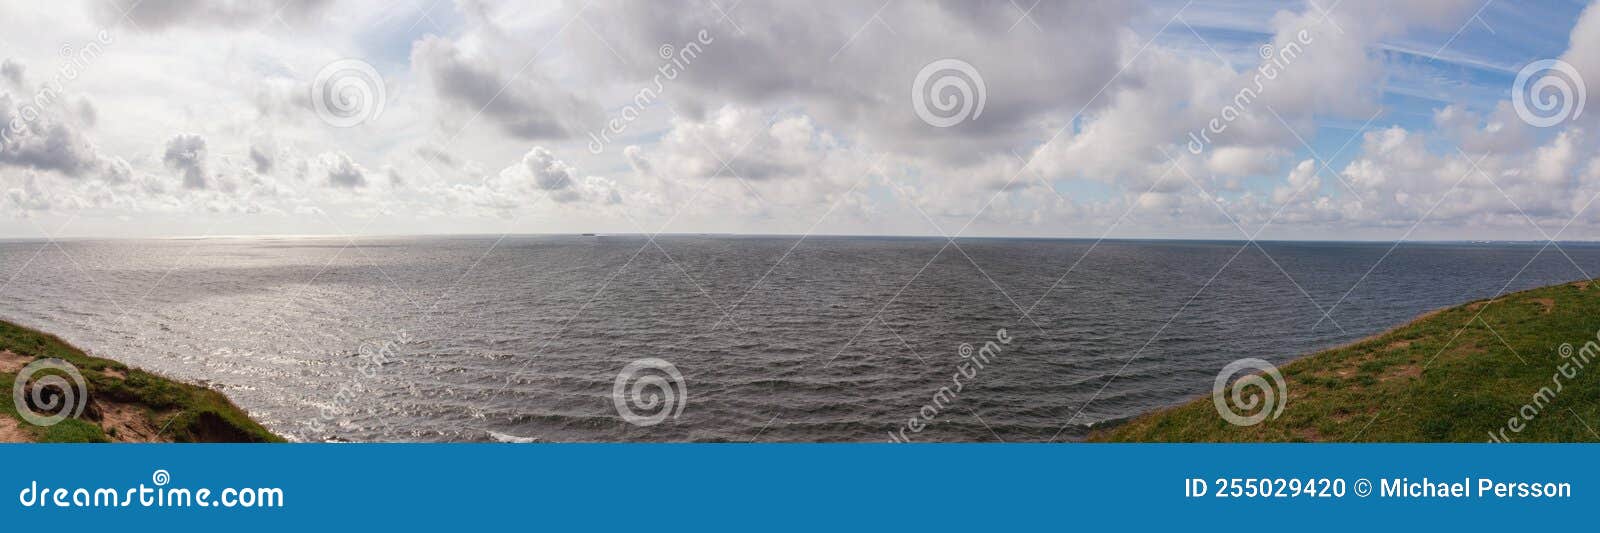 panorama of dramatic summer cloud sky above the baltic sea seen from ales stenar in skÃÂ¥ne scania sweden